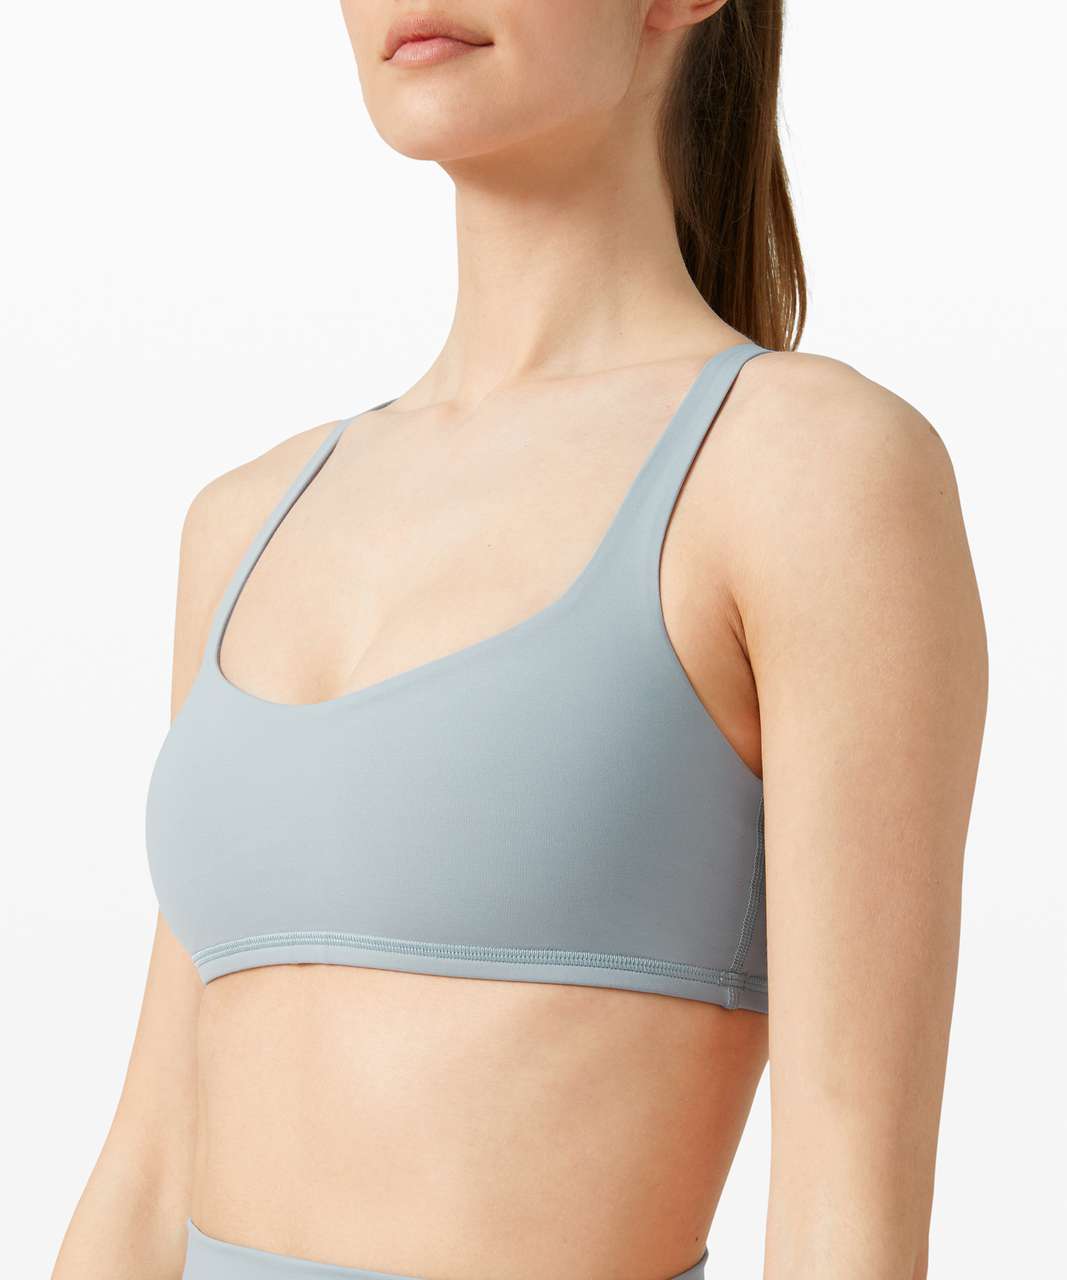 Lululemon Free To Be Bra *Light Support, A/B Cup (Online Only) - Blue Cast